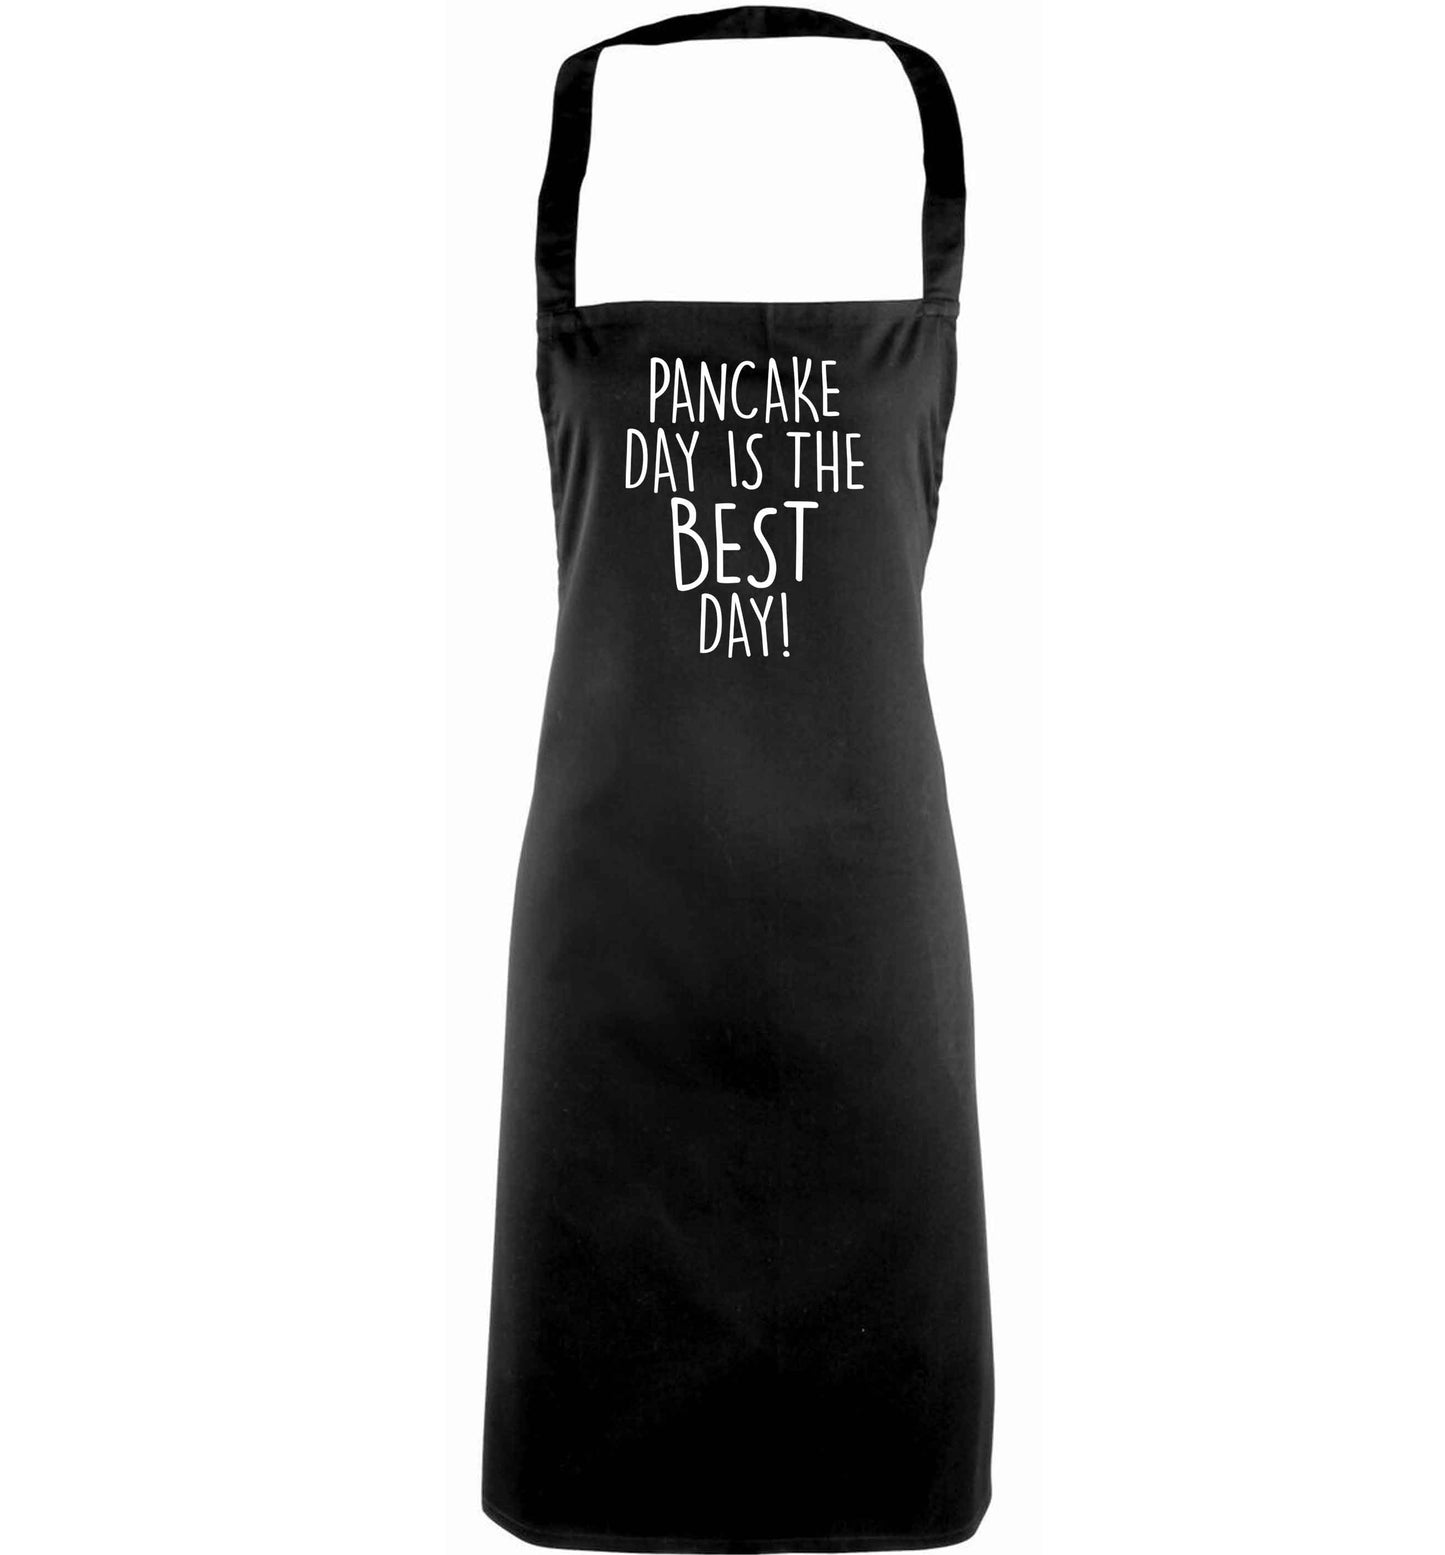 Pancake day is the best day adults black apron